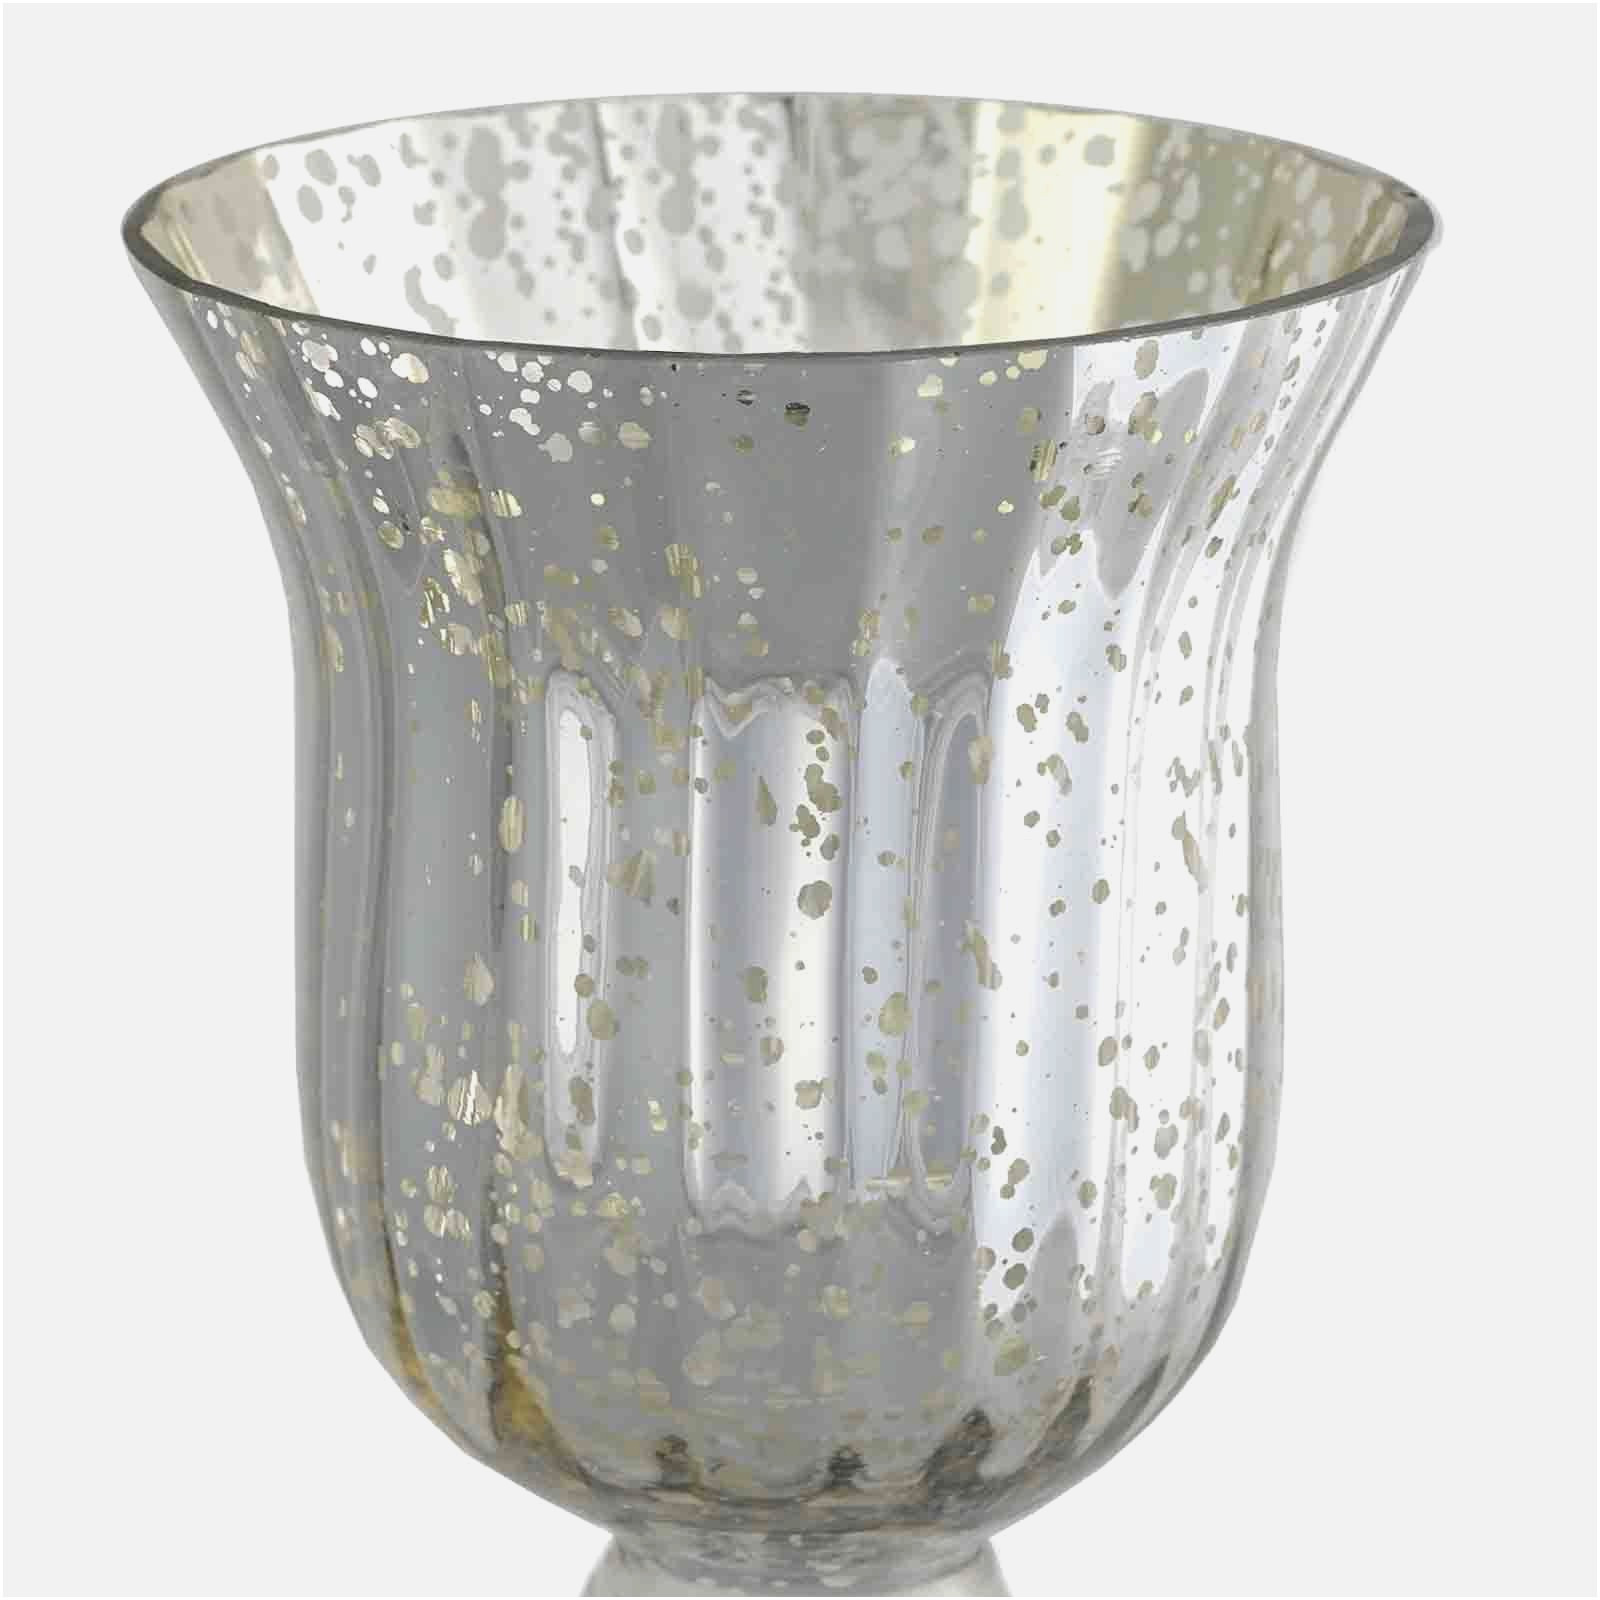 22 Ideal Glass Vase with Lid 2024 free download glass vase with lid of wedding party favors fresh living room vases wedding inspirational h within wedding party favors inspirational 40 lovely wedding party favors gallery of wedding party 